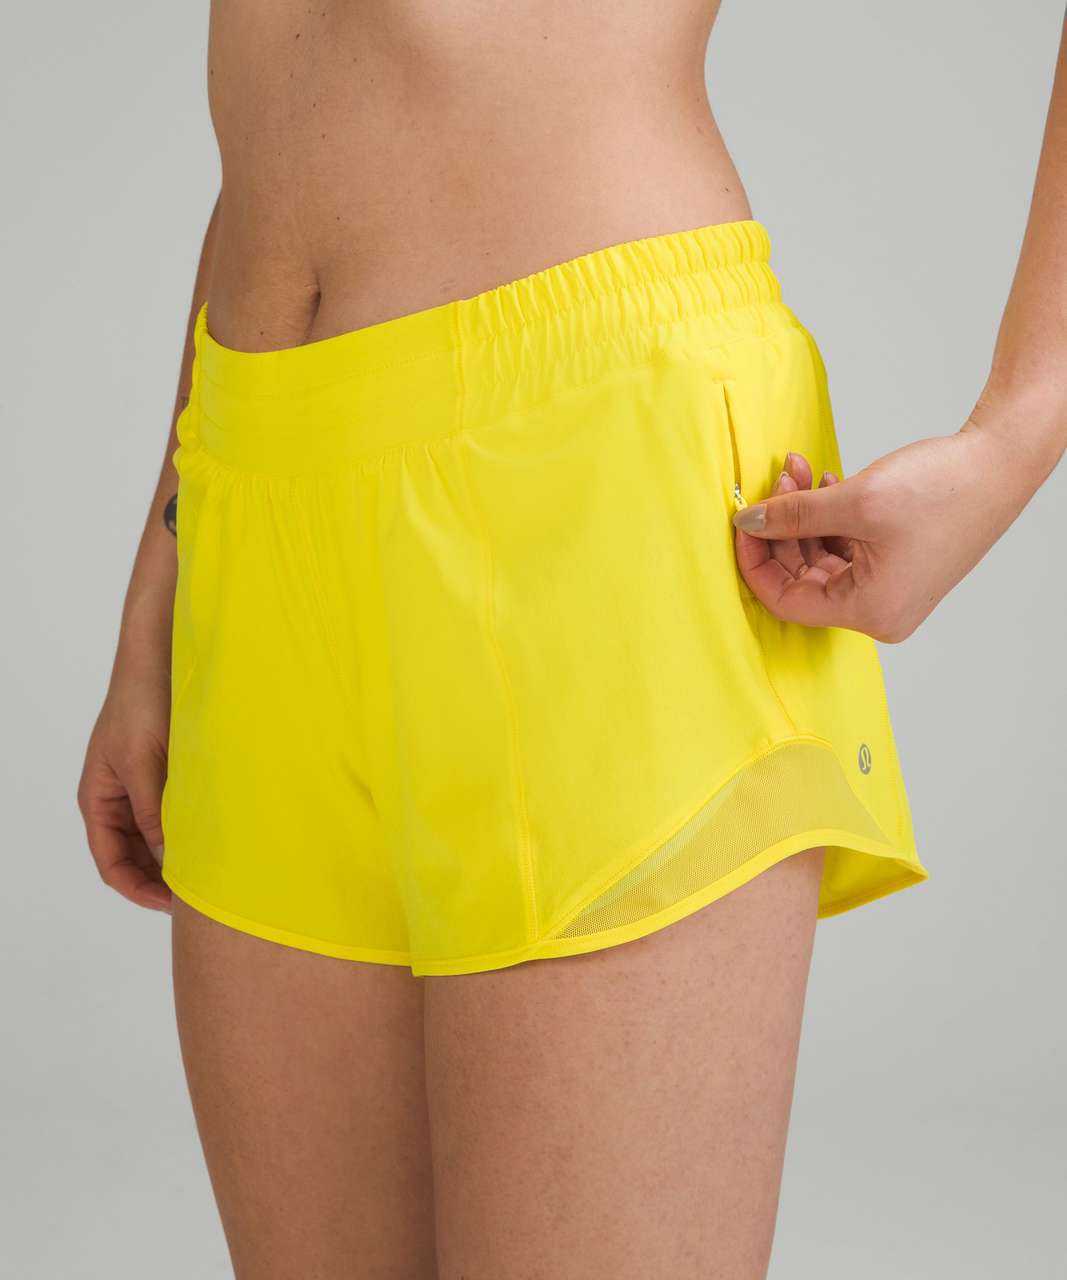 Lululemon Hotty Hot Low-Rise Lined Short 4" - Sonic Yellow